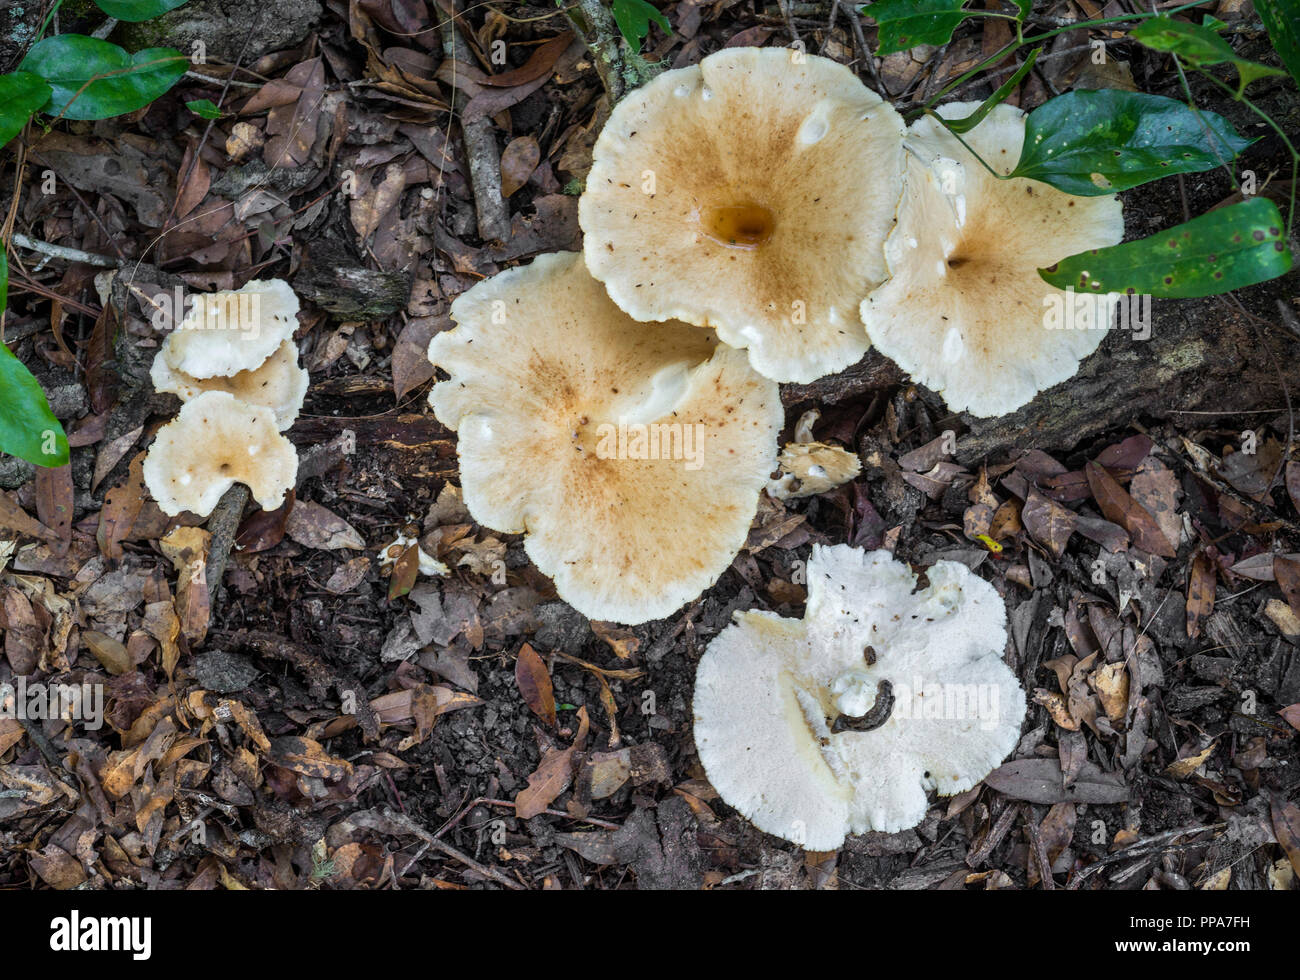 Large white mushrooms on forest floor in North Central Florida.  Sheep Polypore--Albatrellus ovinus an edible fungus found throughout North America. Stock Photo